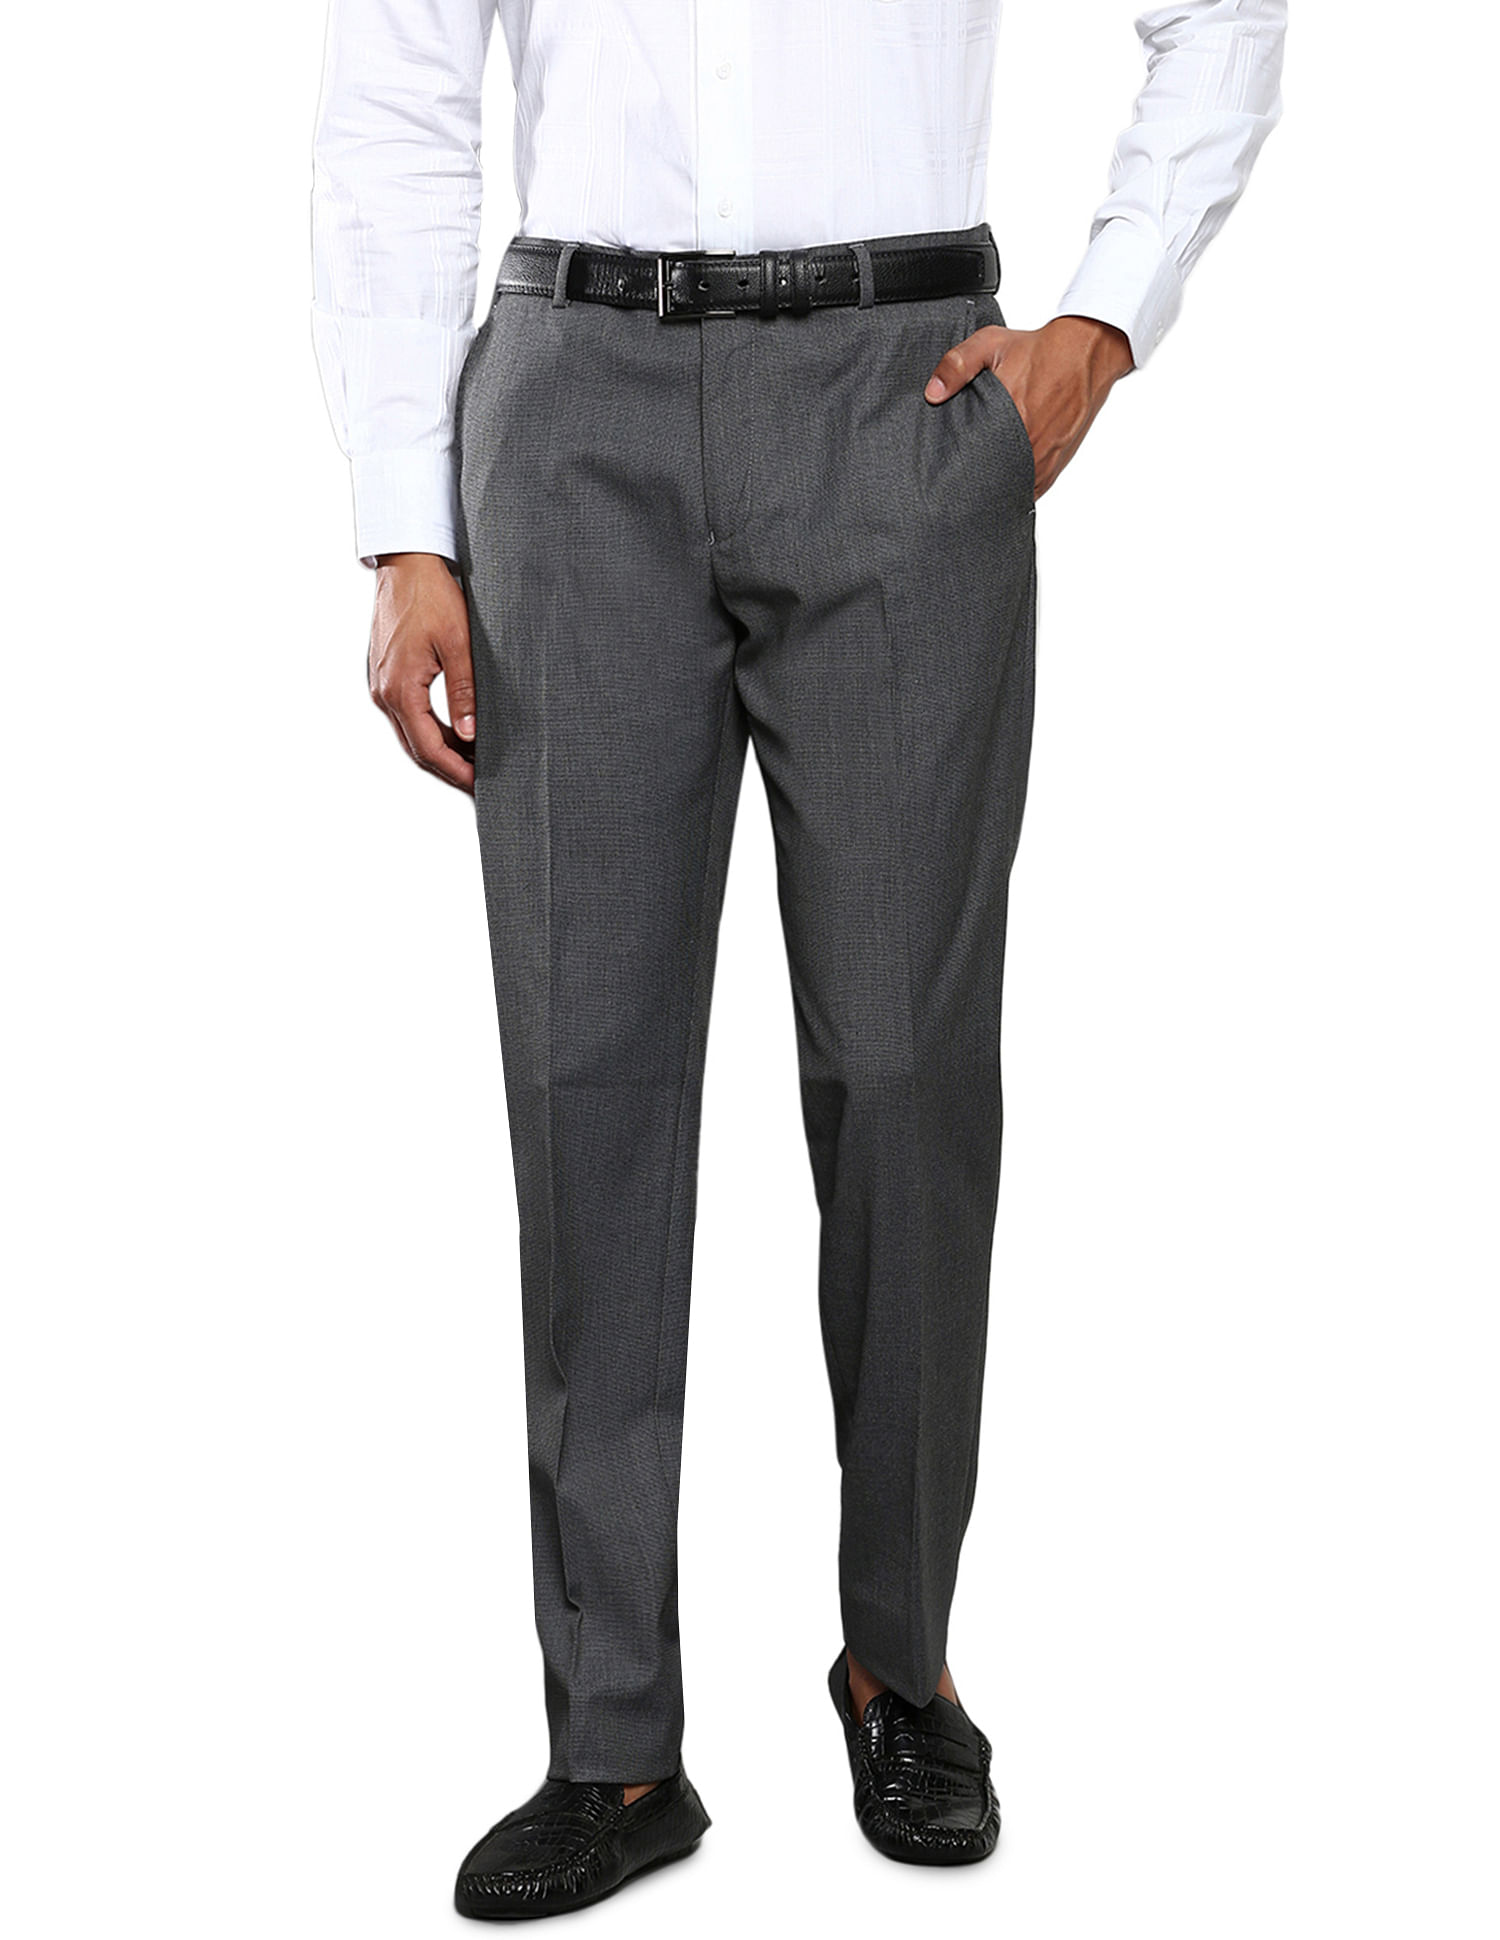 Light Grey Textured Ankle-Length Formal Men Super Slim Fit Trousers -  Selling Fast at Pantaloons.com